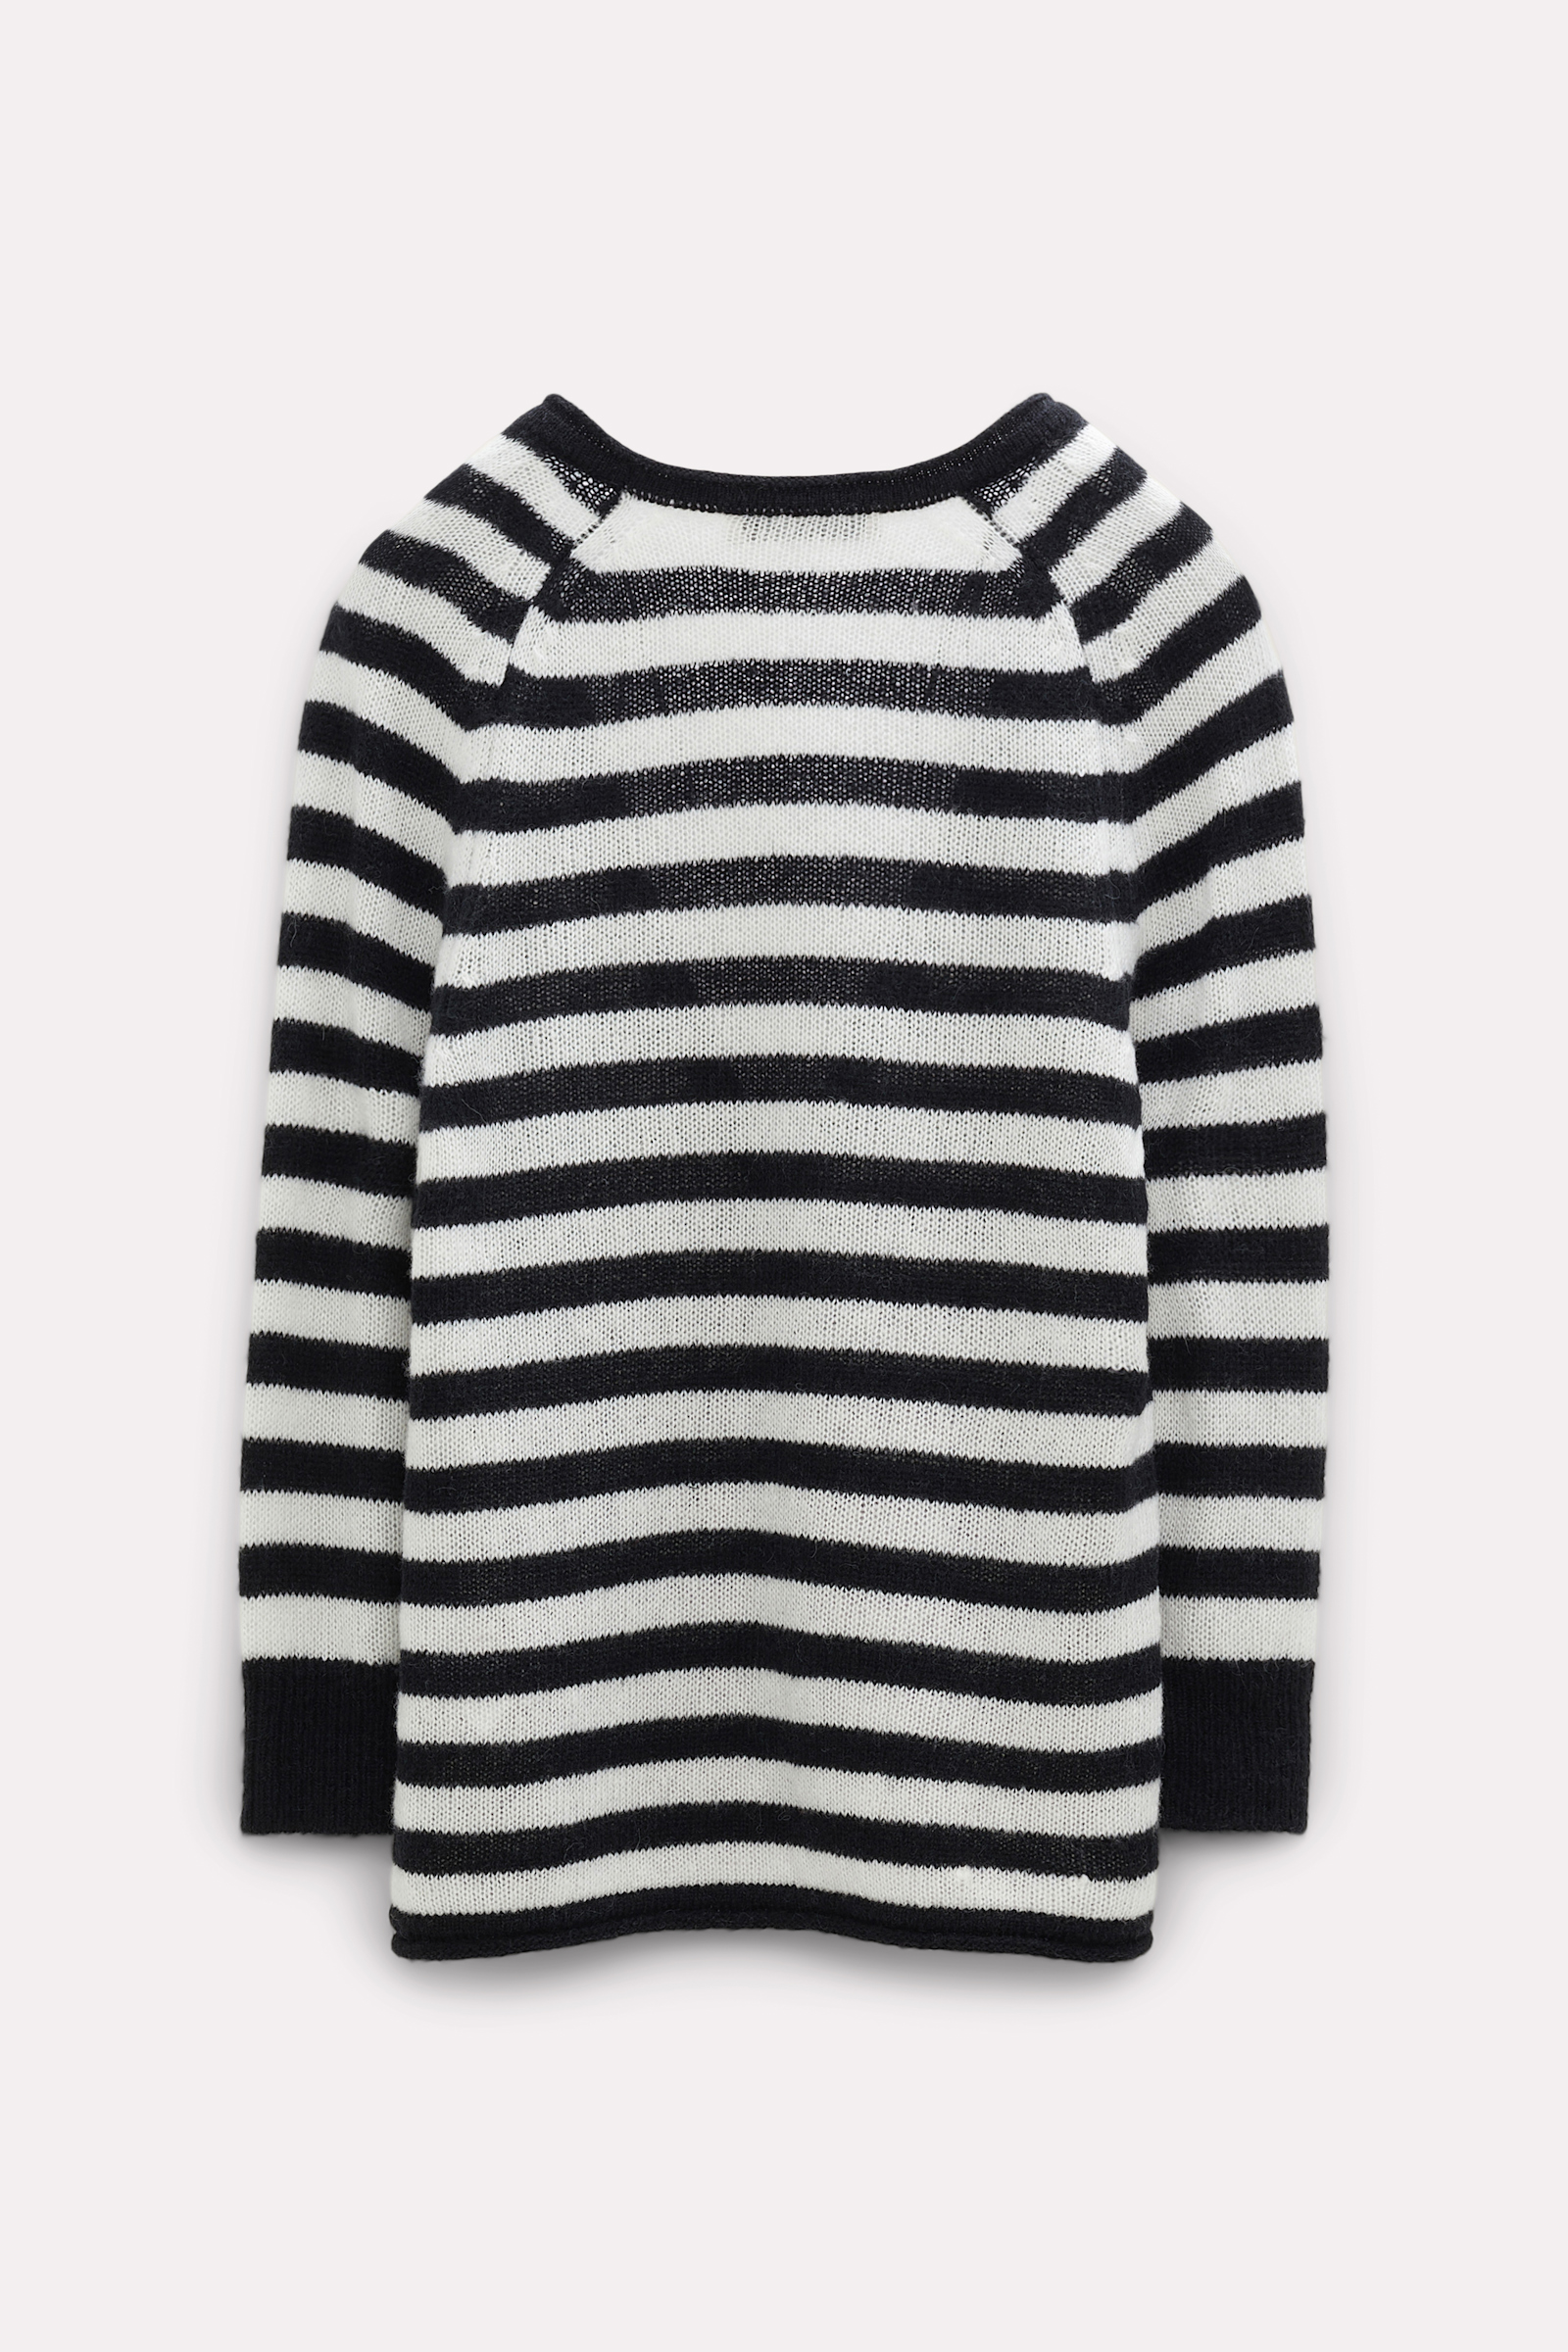 Dorothee Schumacher Twinset comprising a striped V-neck cardigan and top black and white